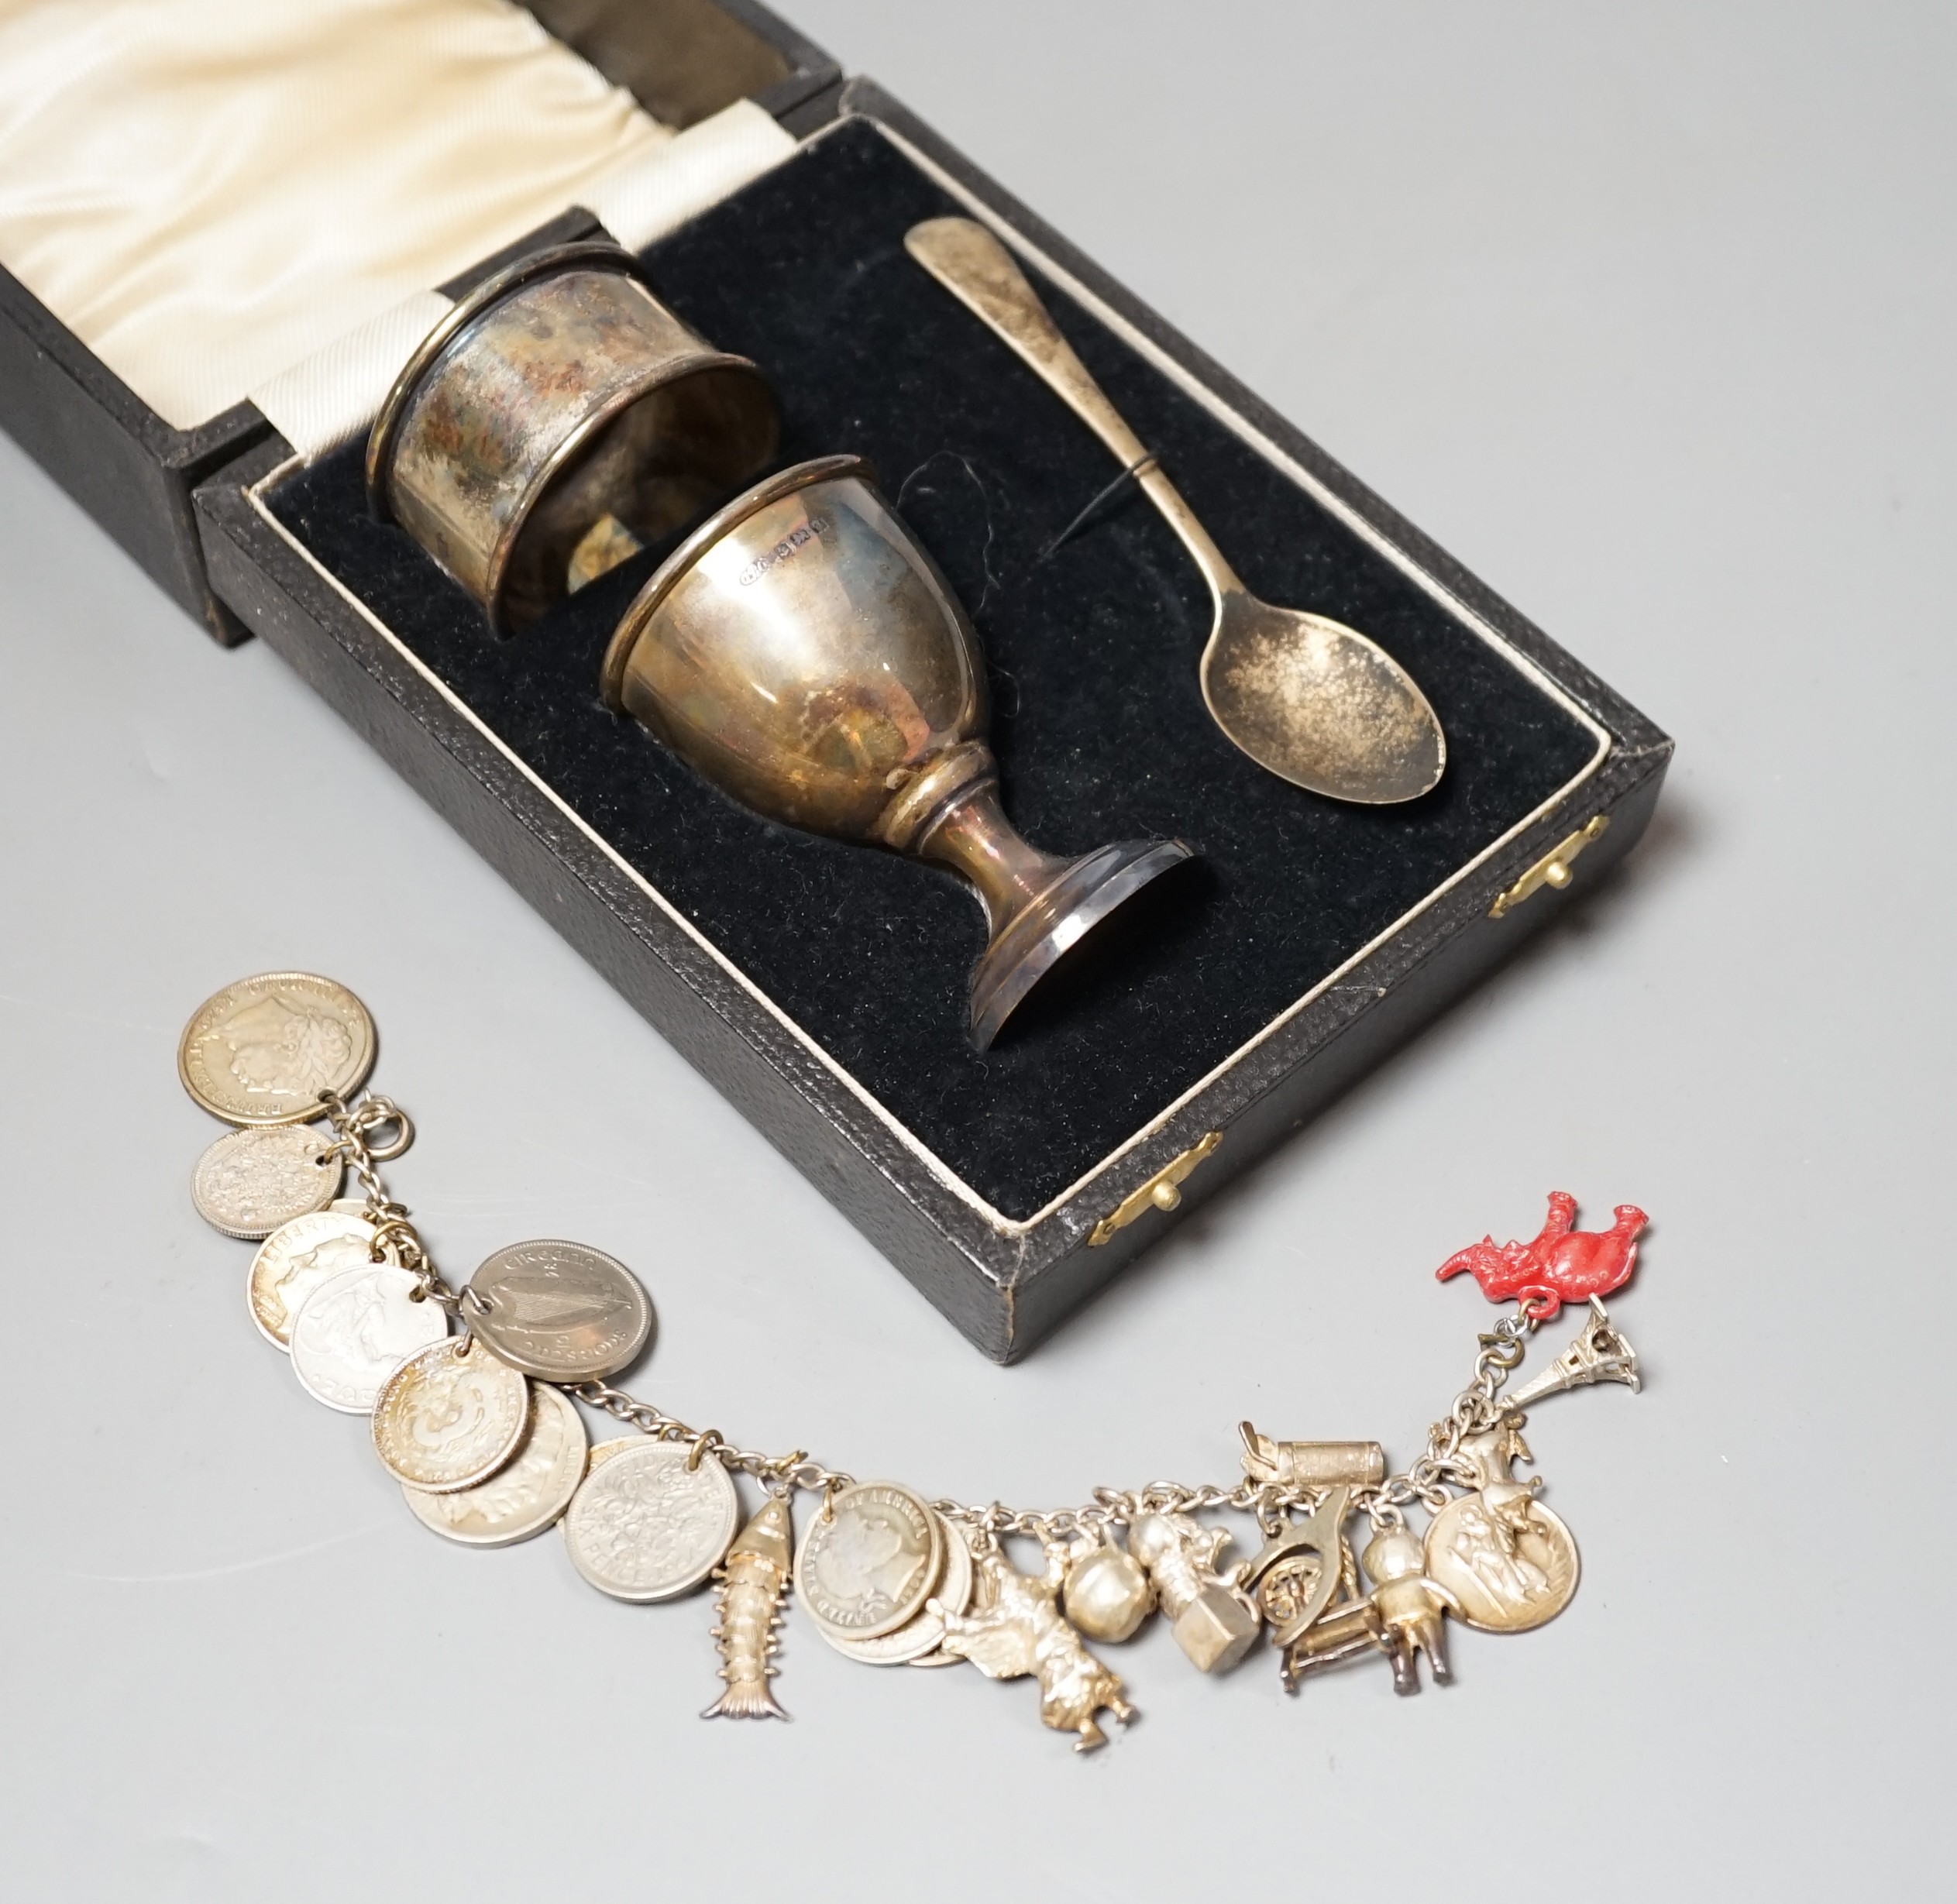 A 1930's cased silver christening set, comprising an egg cup, spoon and napkin ring, together with a white metal charm bracelet hung with assorted charms and coins including silver.